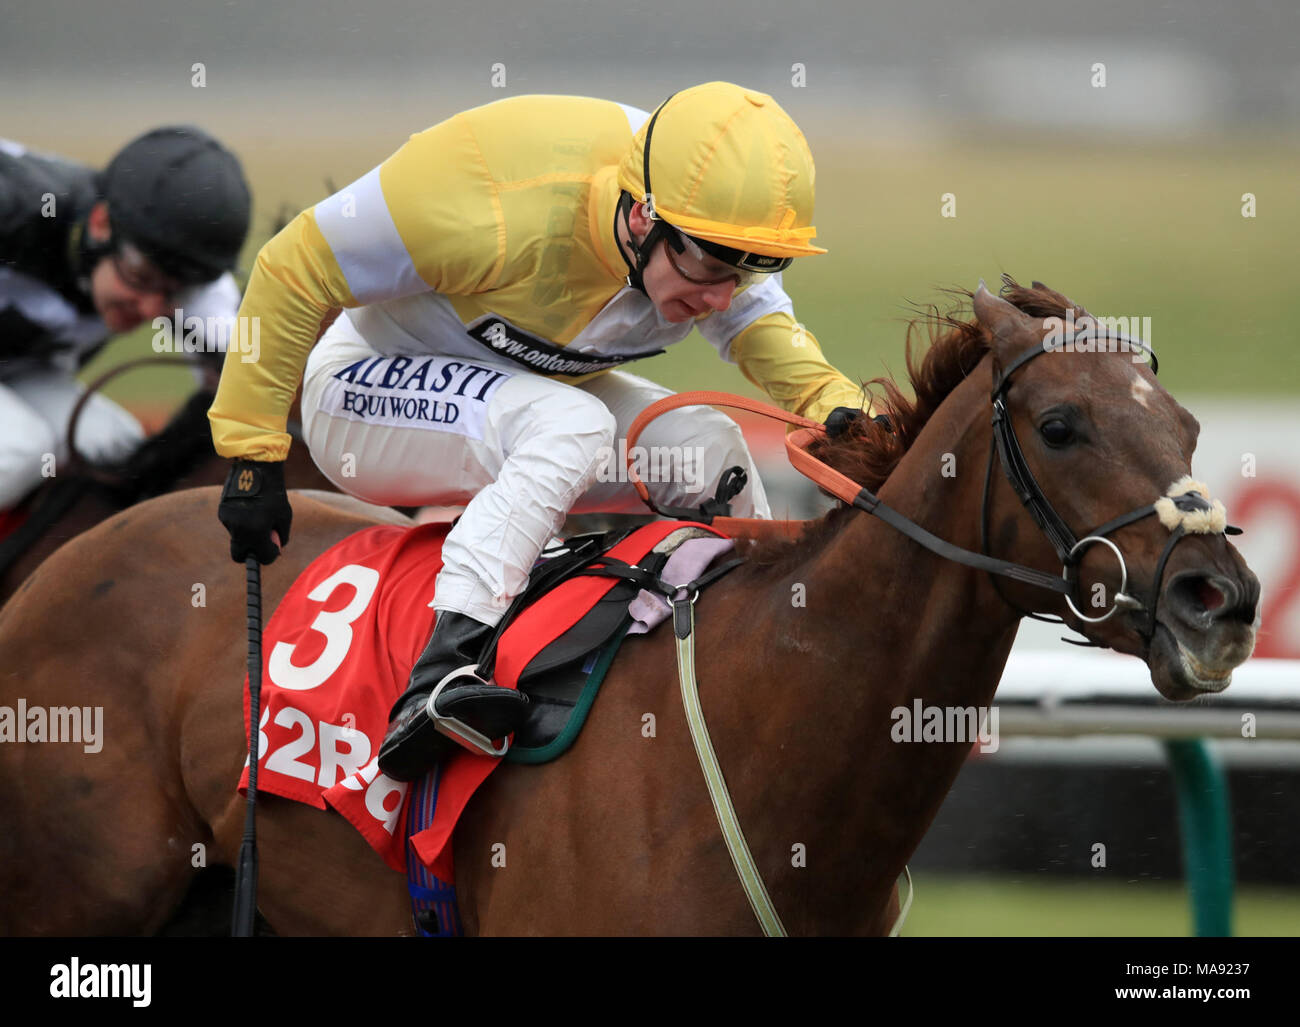 Corinthia Knight ridden by Oisin Murphy wins the 32Red 3 Year Old All-Weather Championships Conditions Stakes during the AW Championship Finals Day at Lingfield Racecourse. Stock Photo